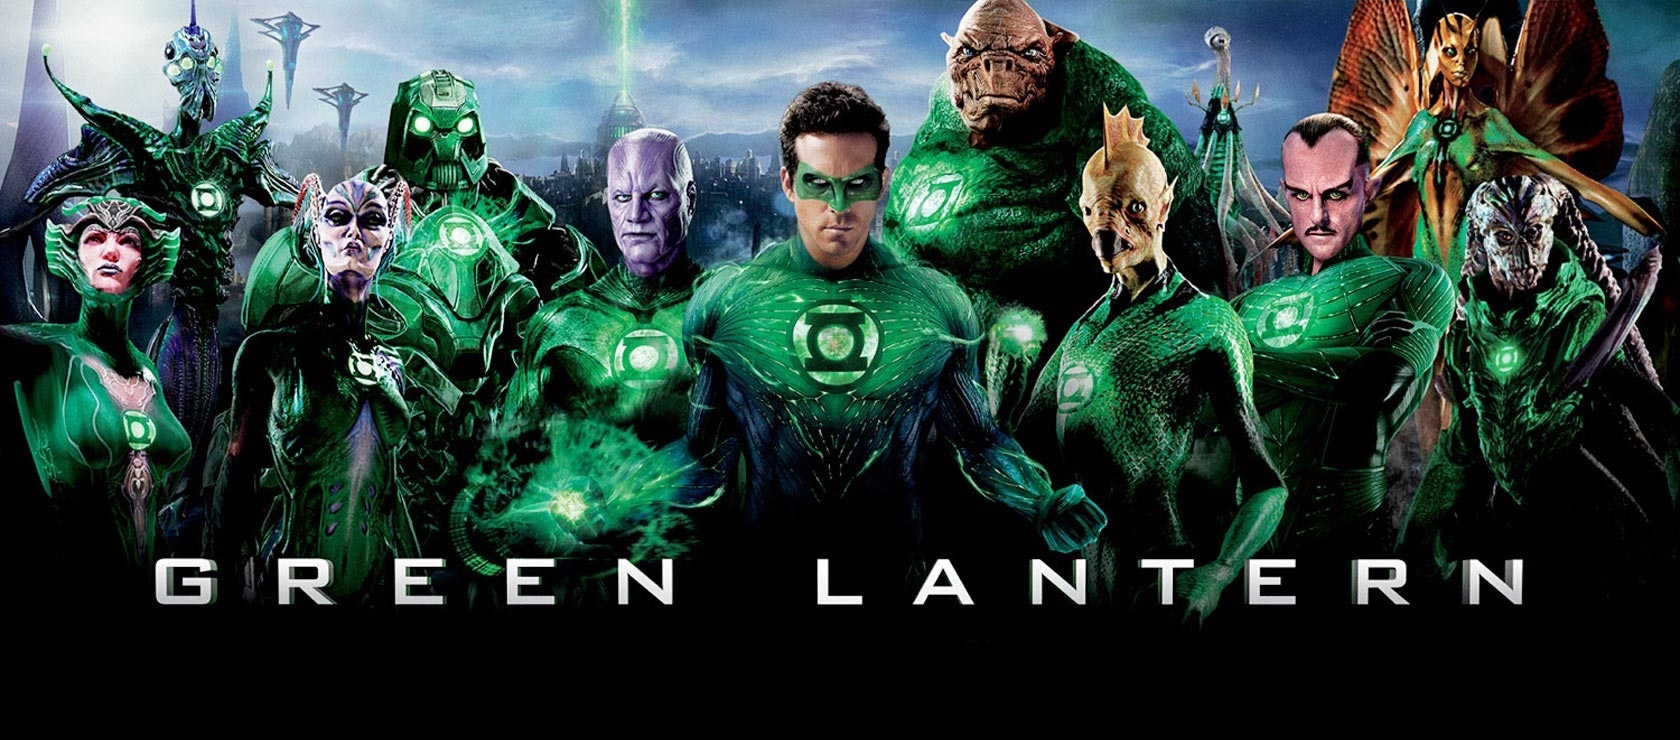 Green Lantern Blu-ray Steelbook gets a new edition from France